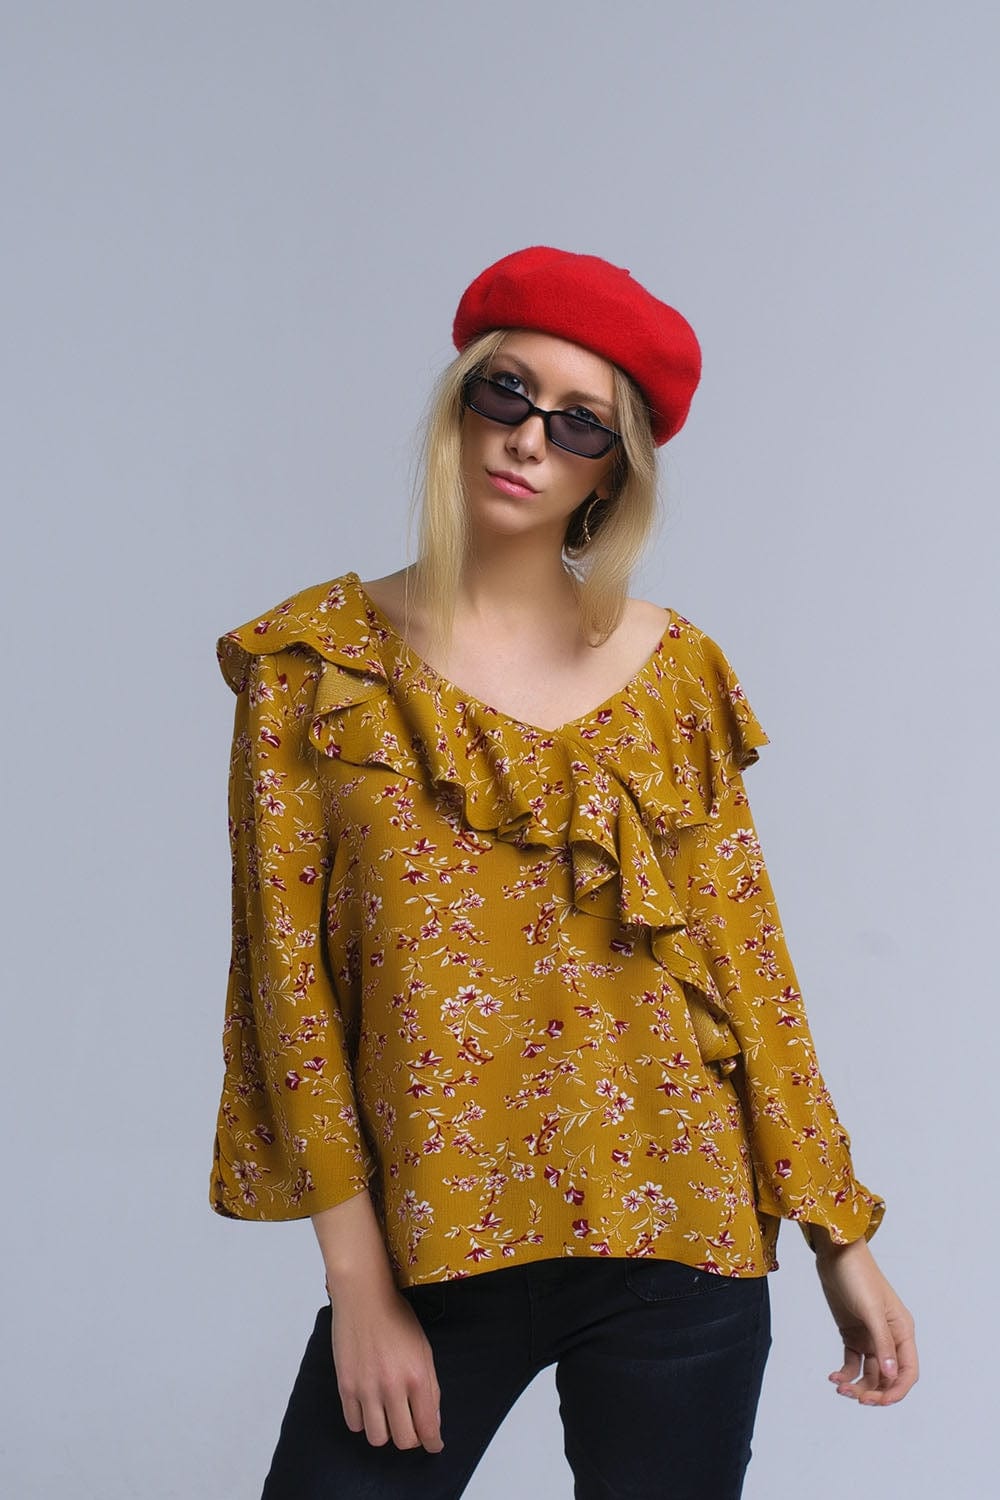 Q2 Women's Blouse Shirt with crossed ruffles in mustard